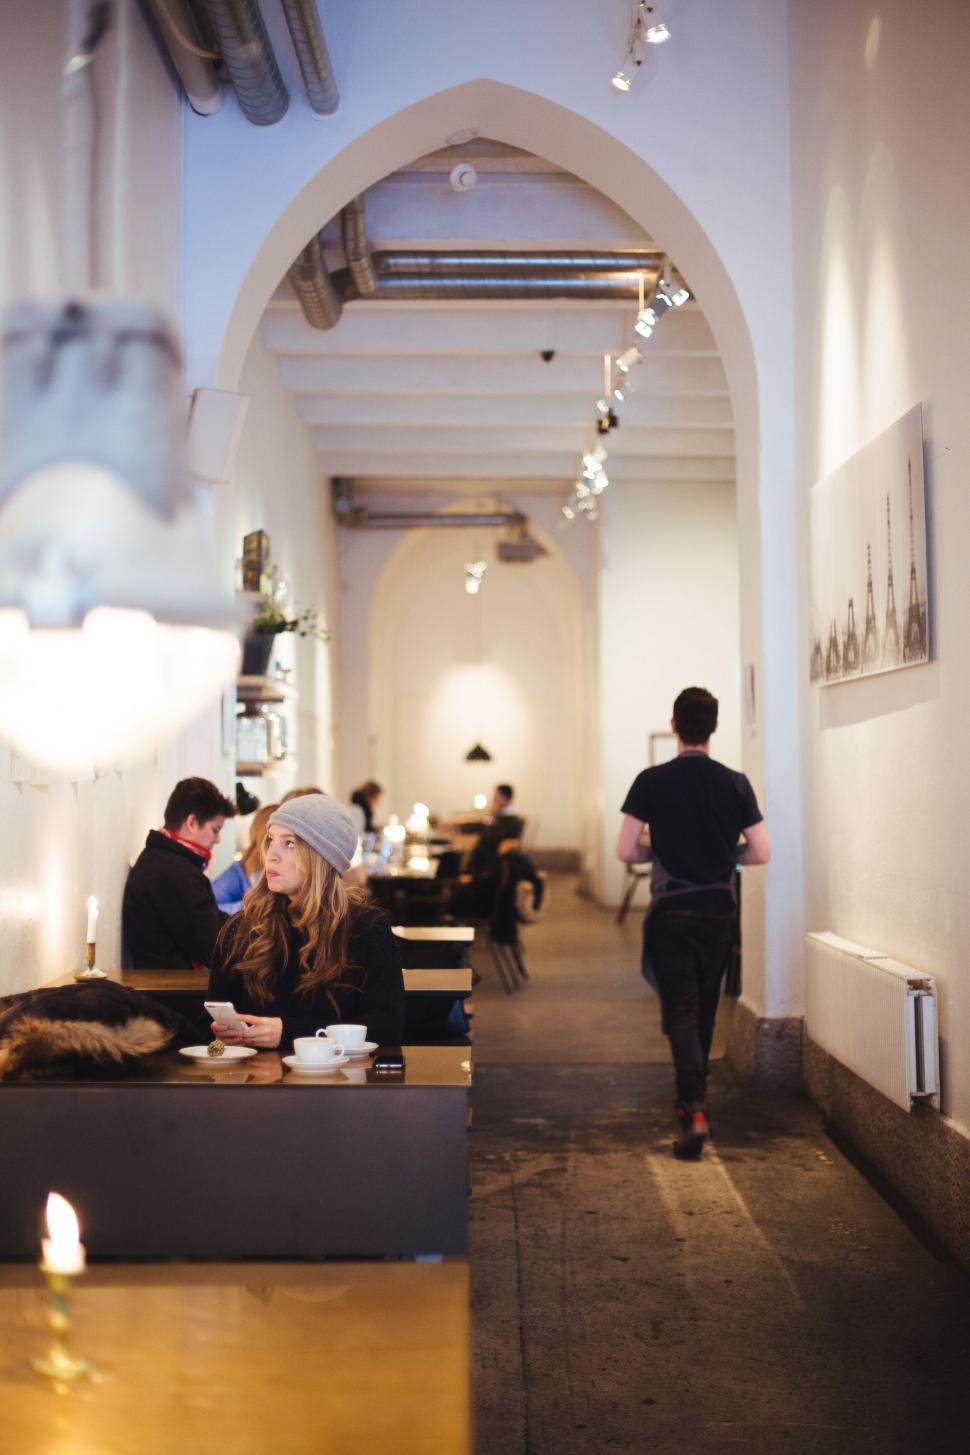 Free Image of Cafe interior with customers and warm lighting 